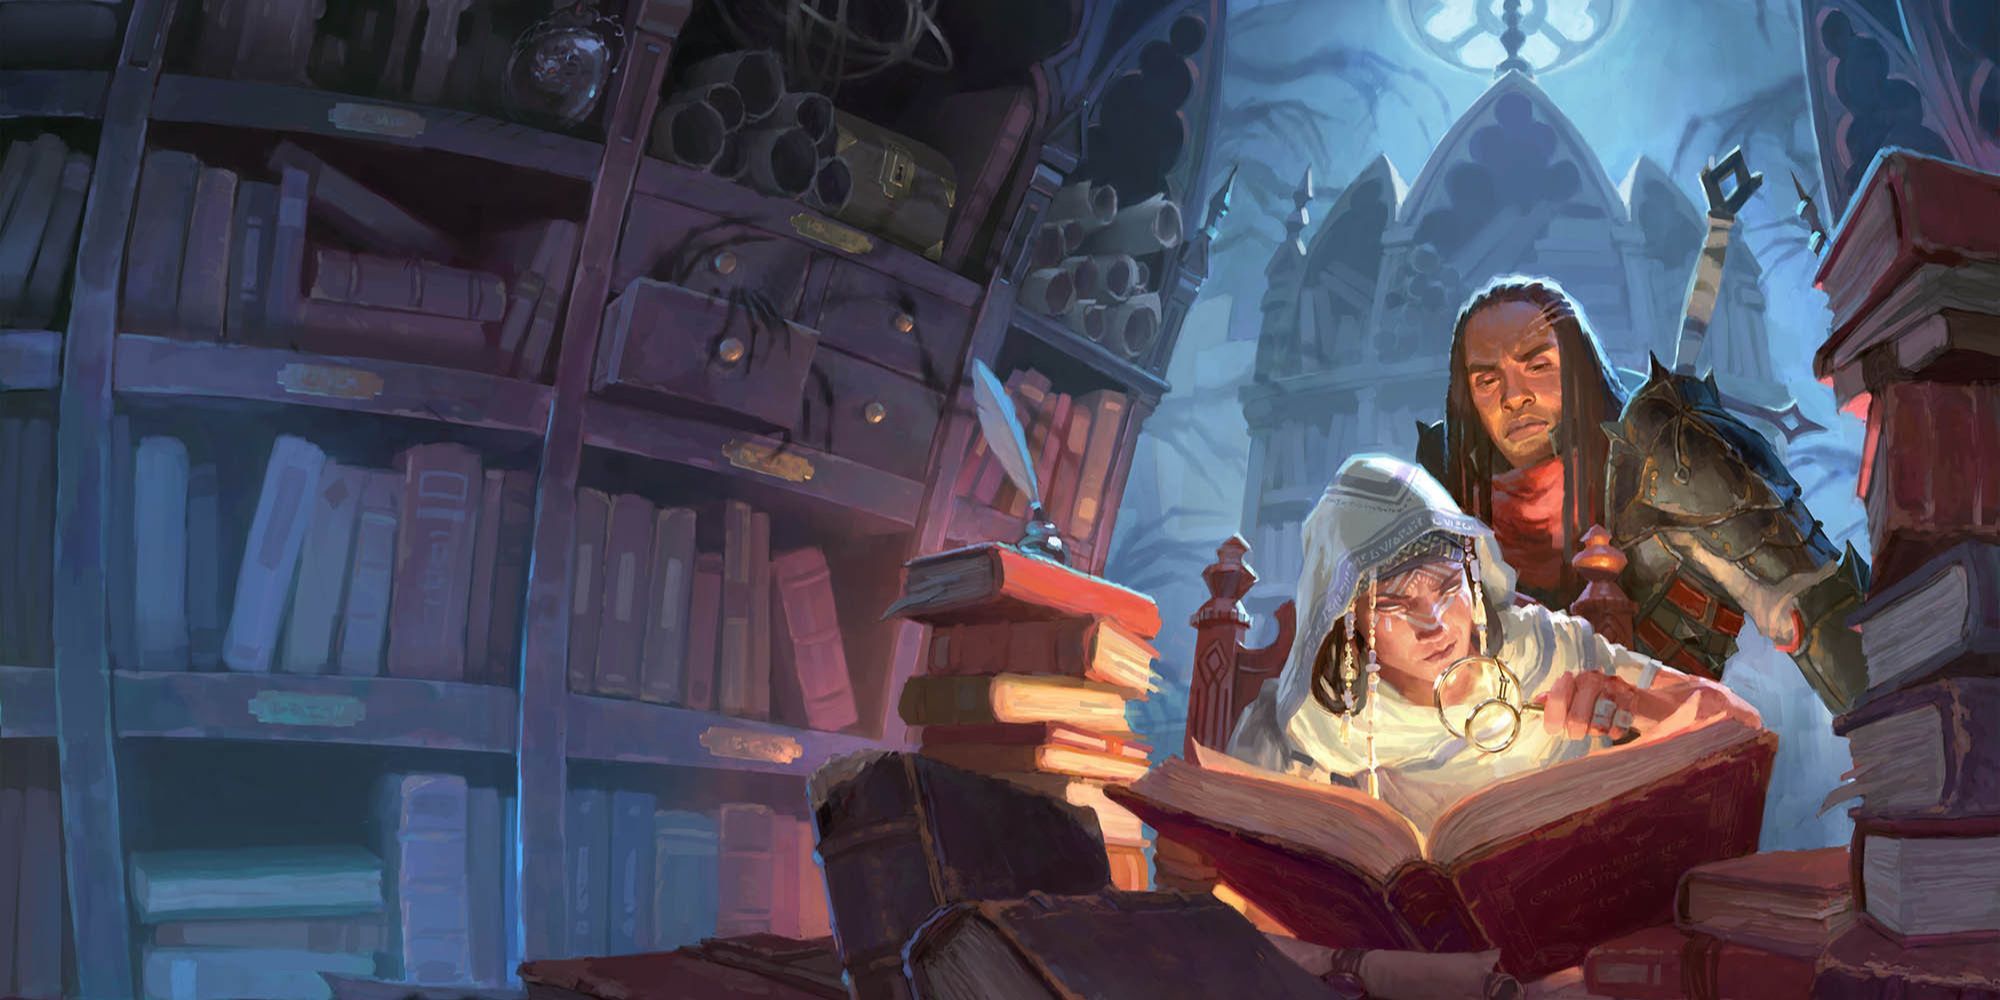 Dungeons And Dragons - Candlekeep Mysteries Cover Art of Adventurers Reading in the Old Library